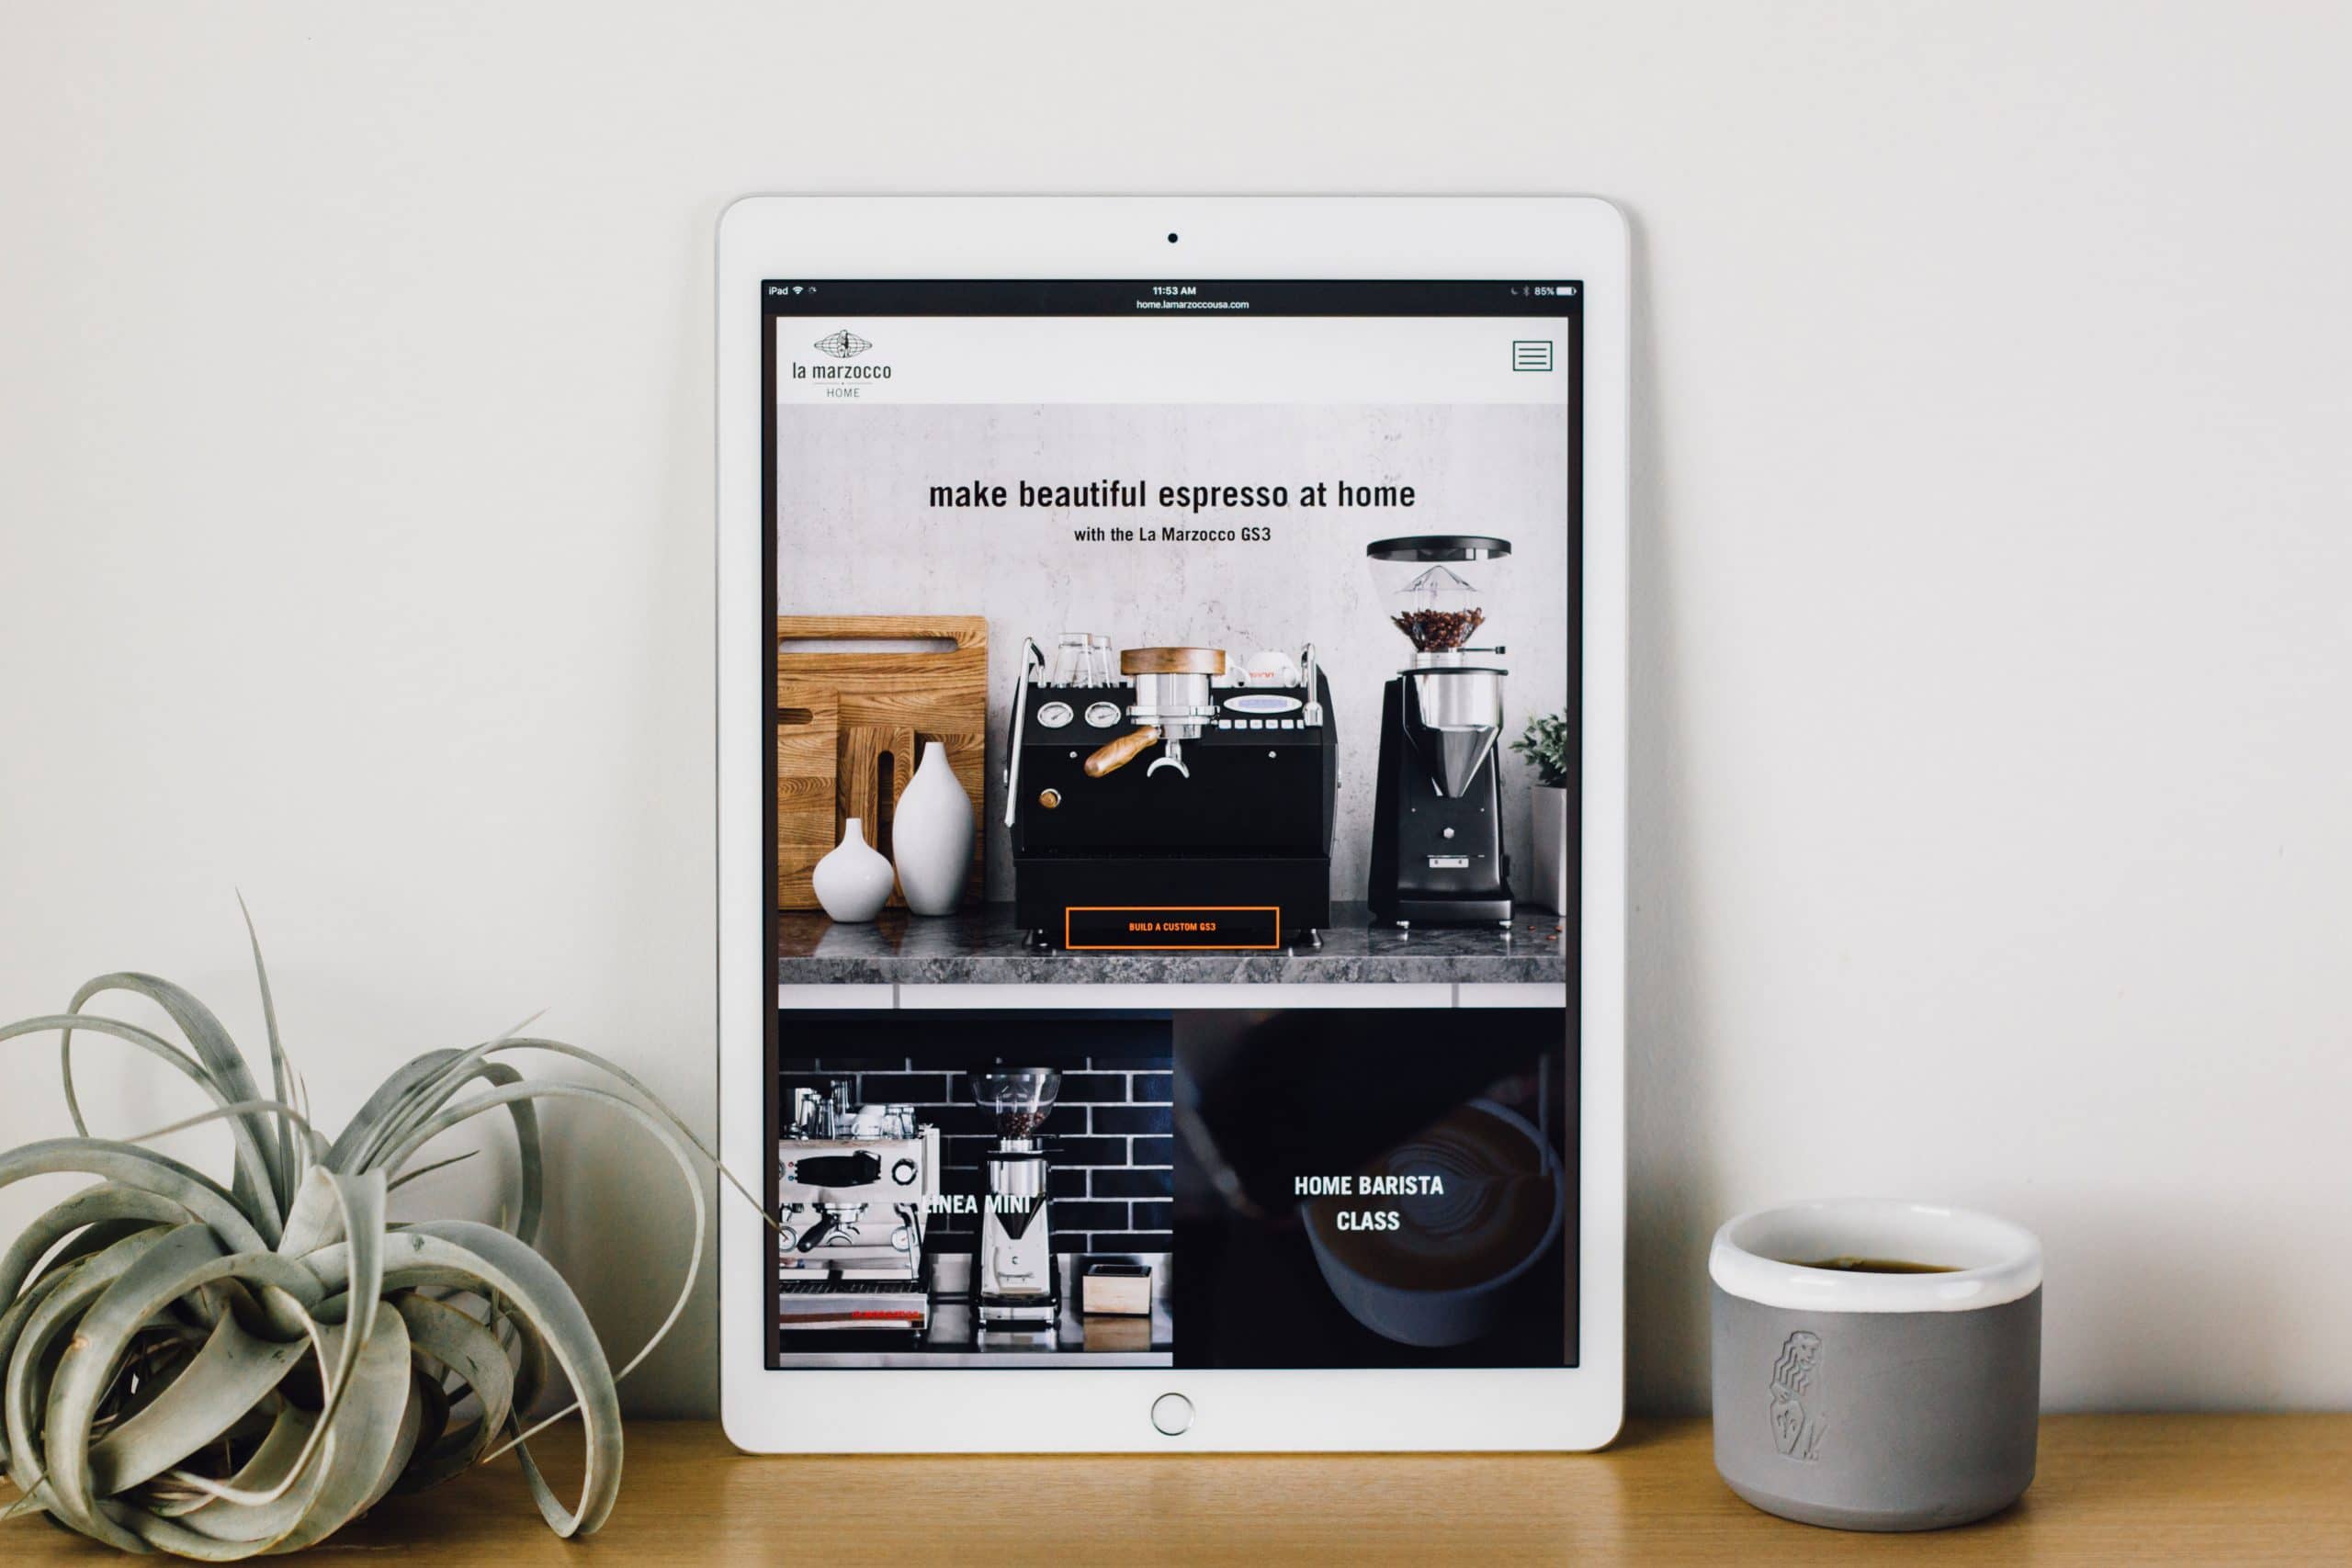 The redesigned home page of the La Marzocco Home shown on an iPad.